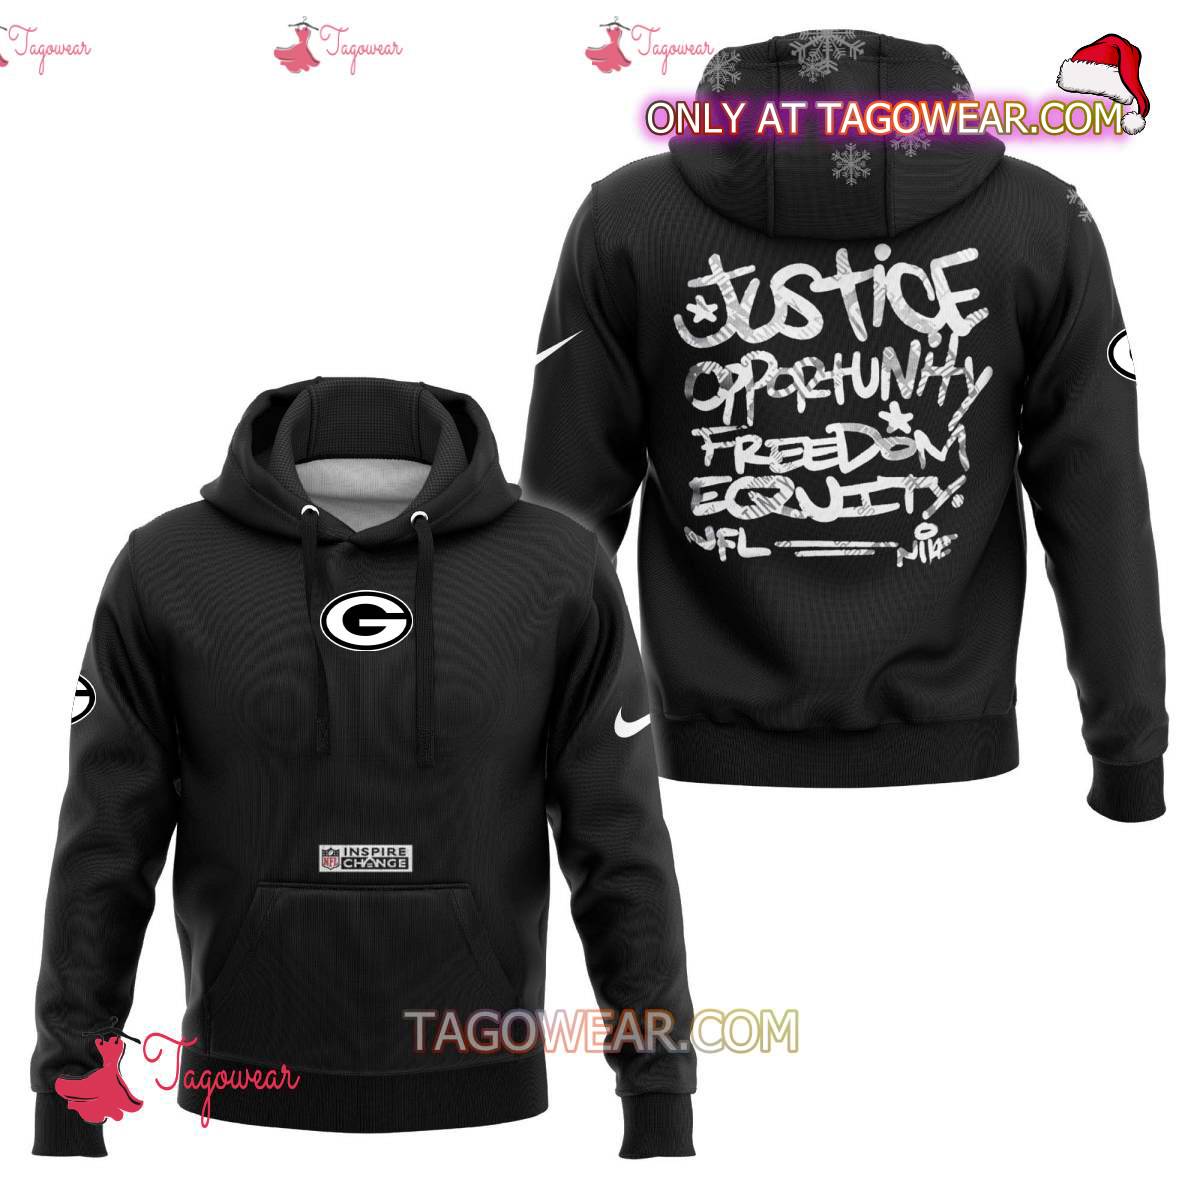 Green Bay Packers NFL Inspire Change Justice Opportunity Equality Freedom Hoodie